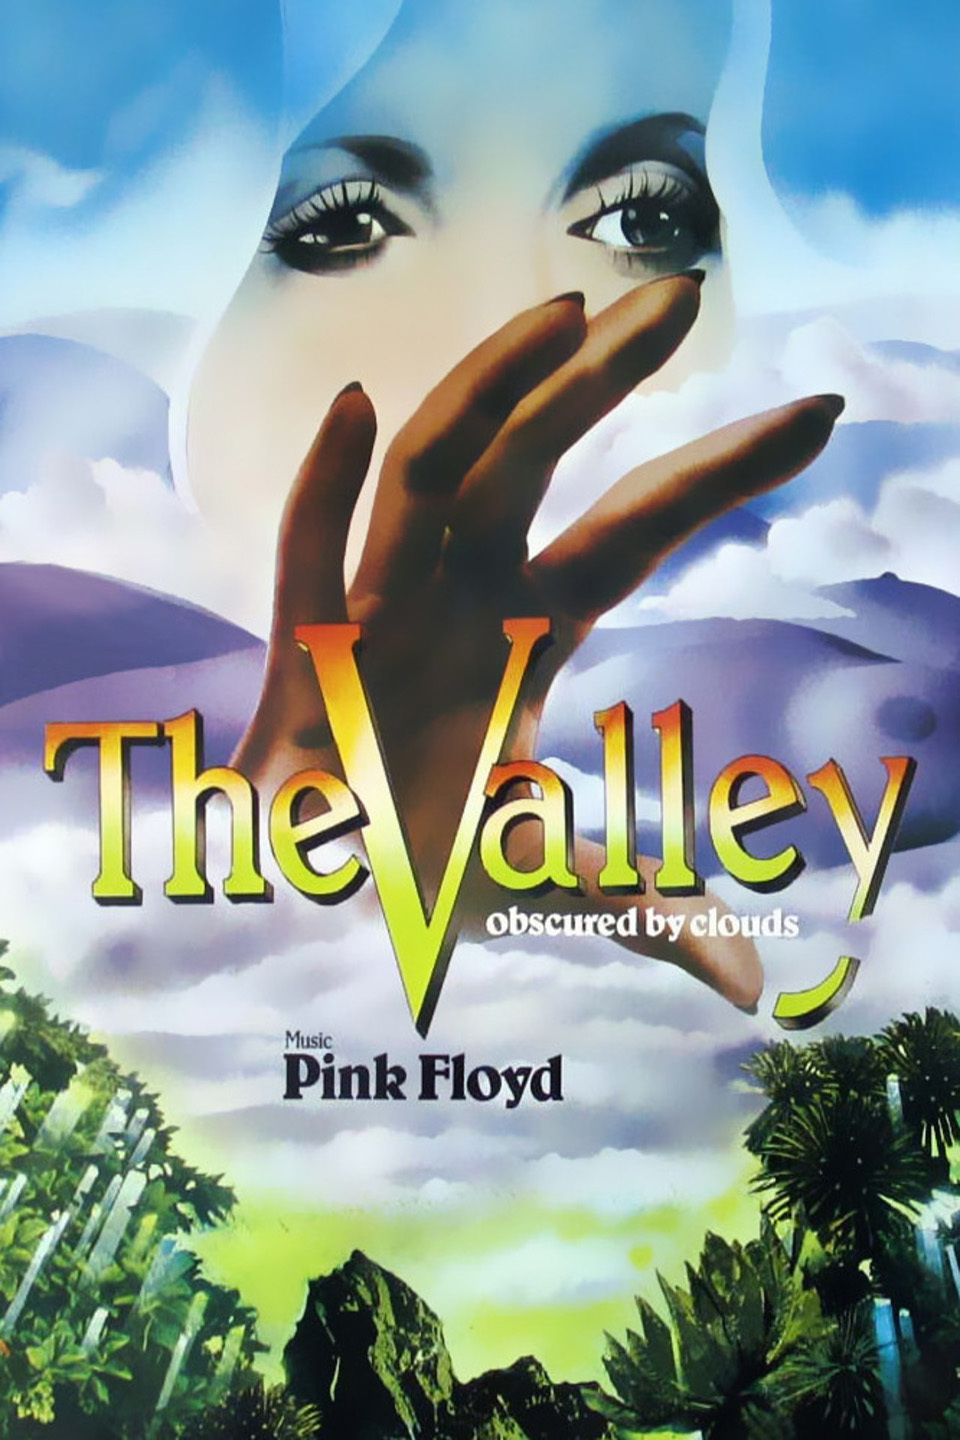 Aero Theatre Presents: Pink Floyd Double Feature The Valley (Obscured by Clouds) & More